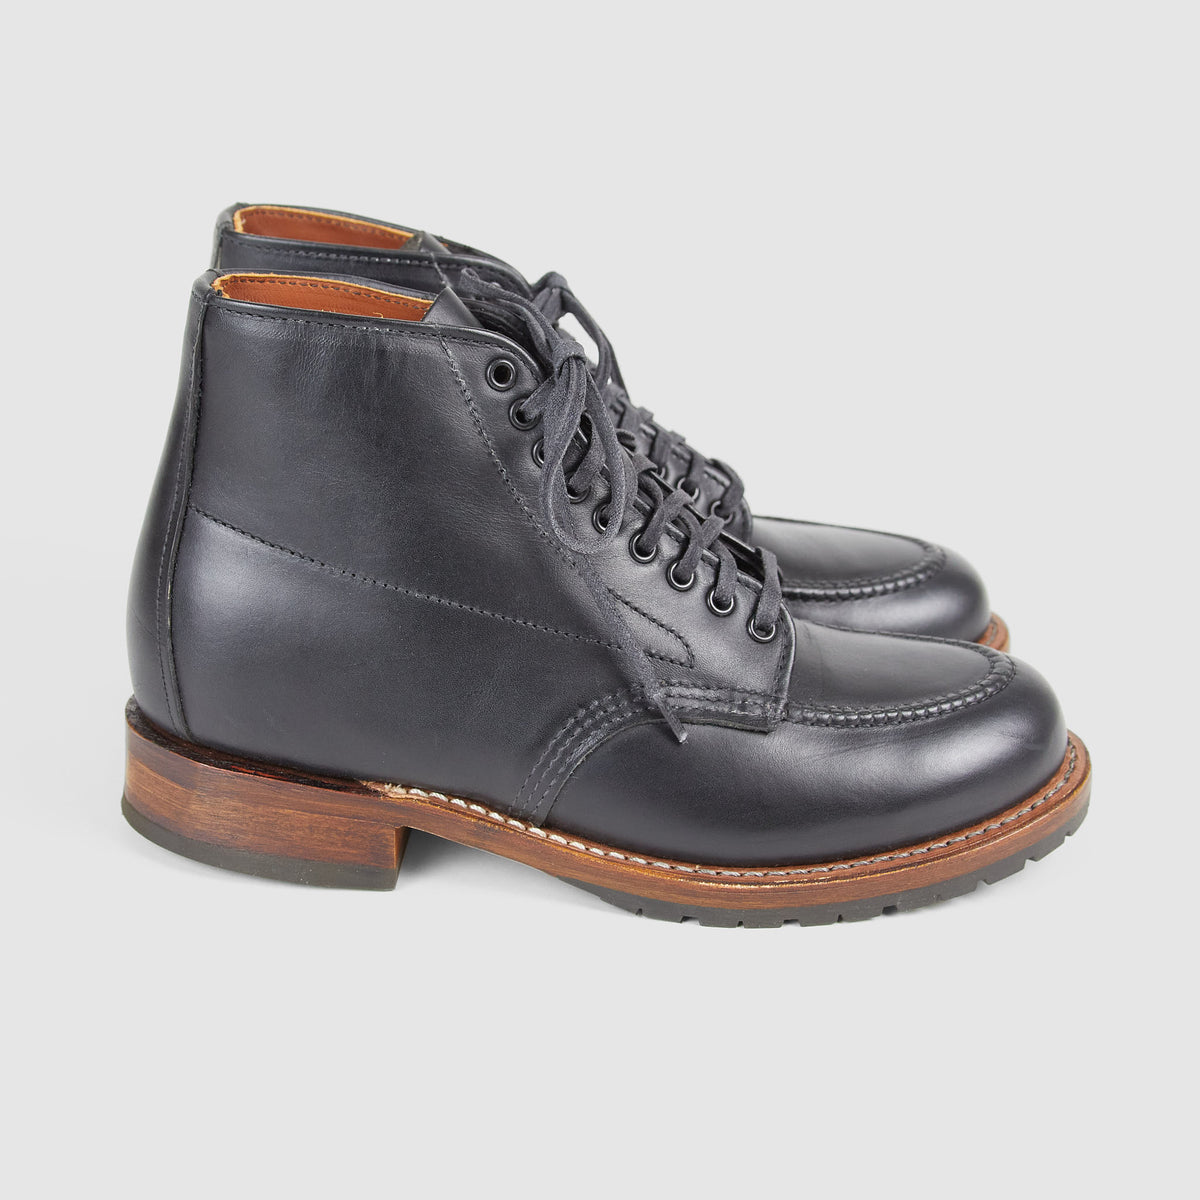 Red Wing Beckman Mock Toe 09029 Boots